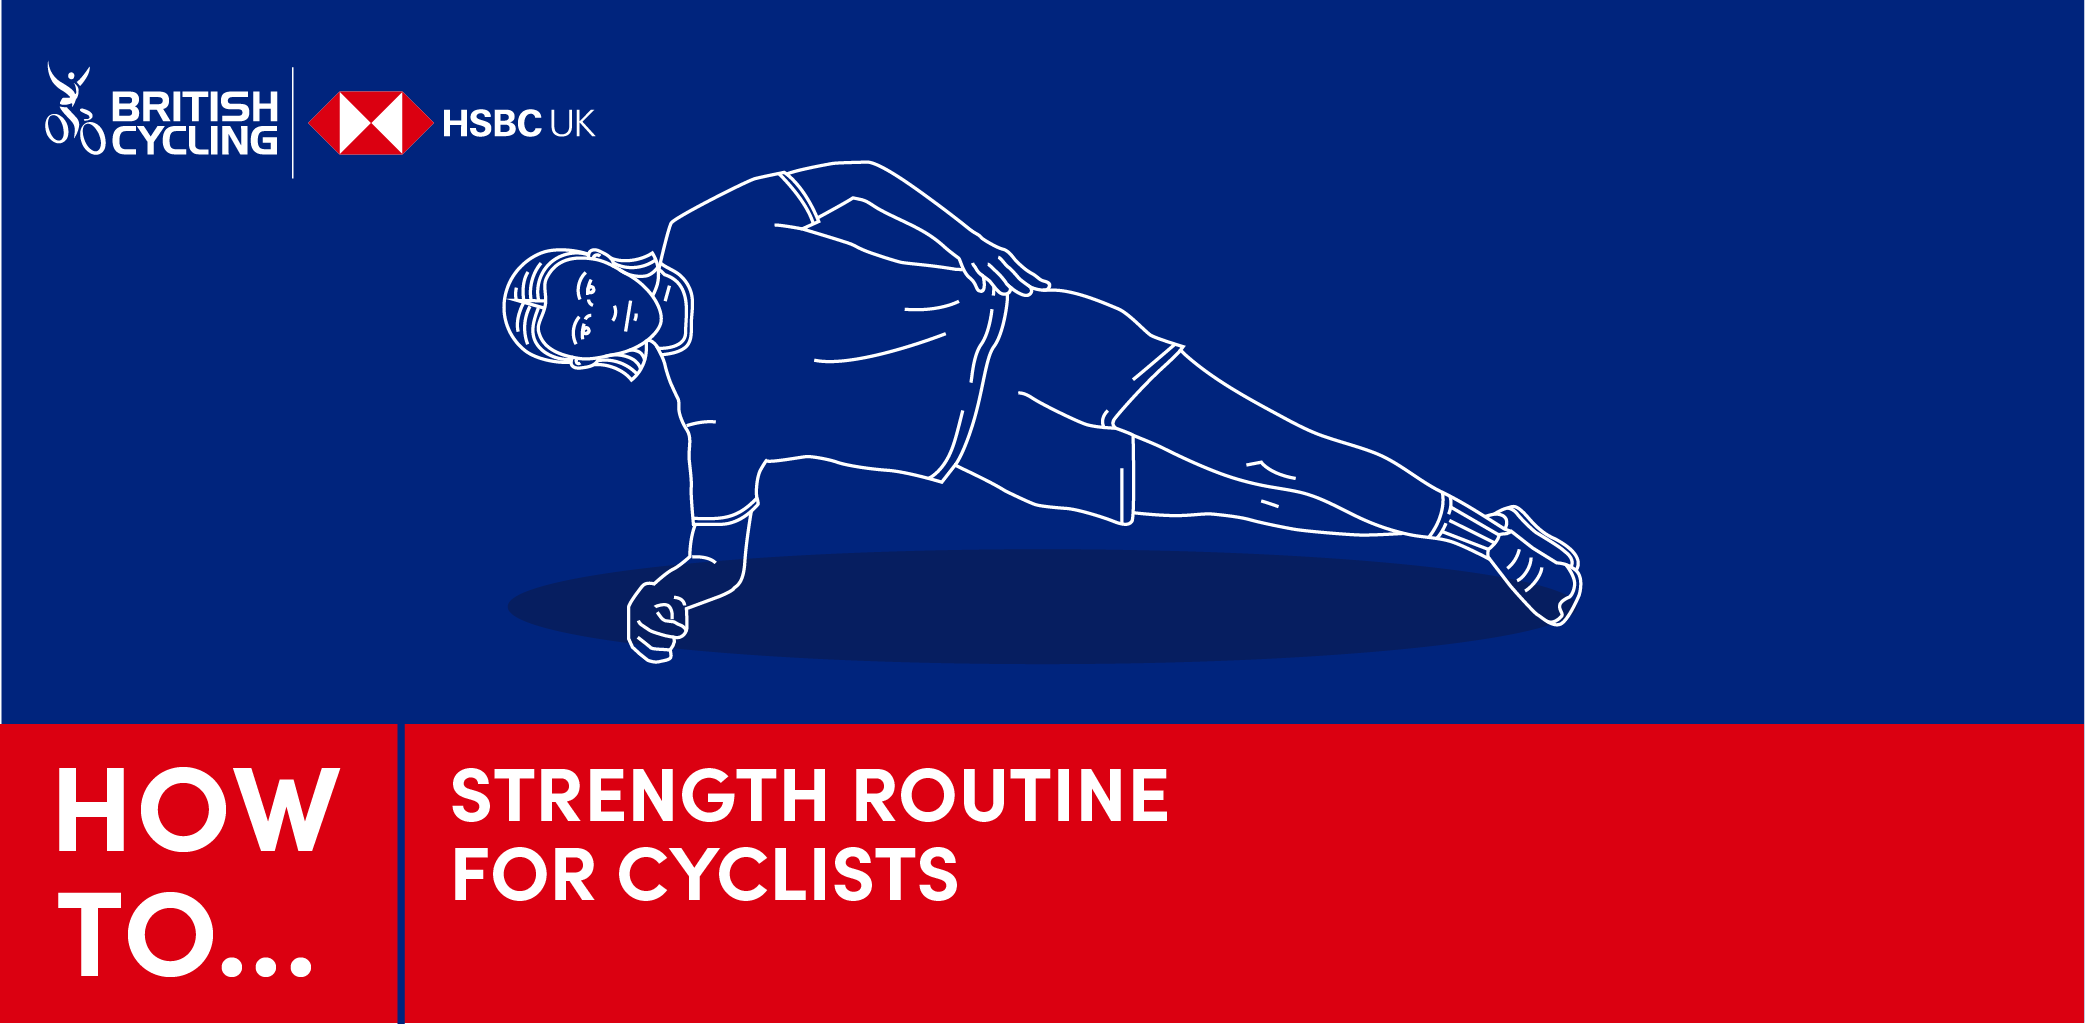 Strength routine for cyclists